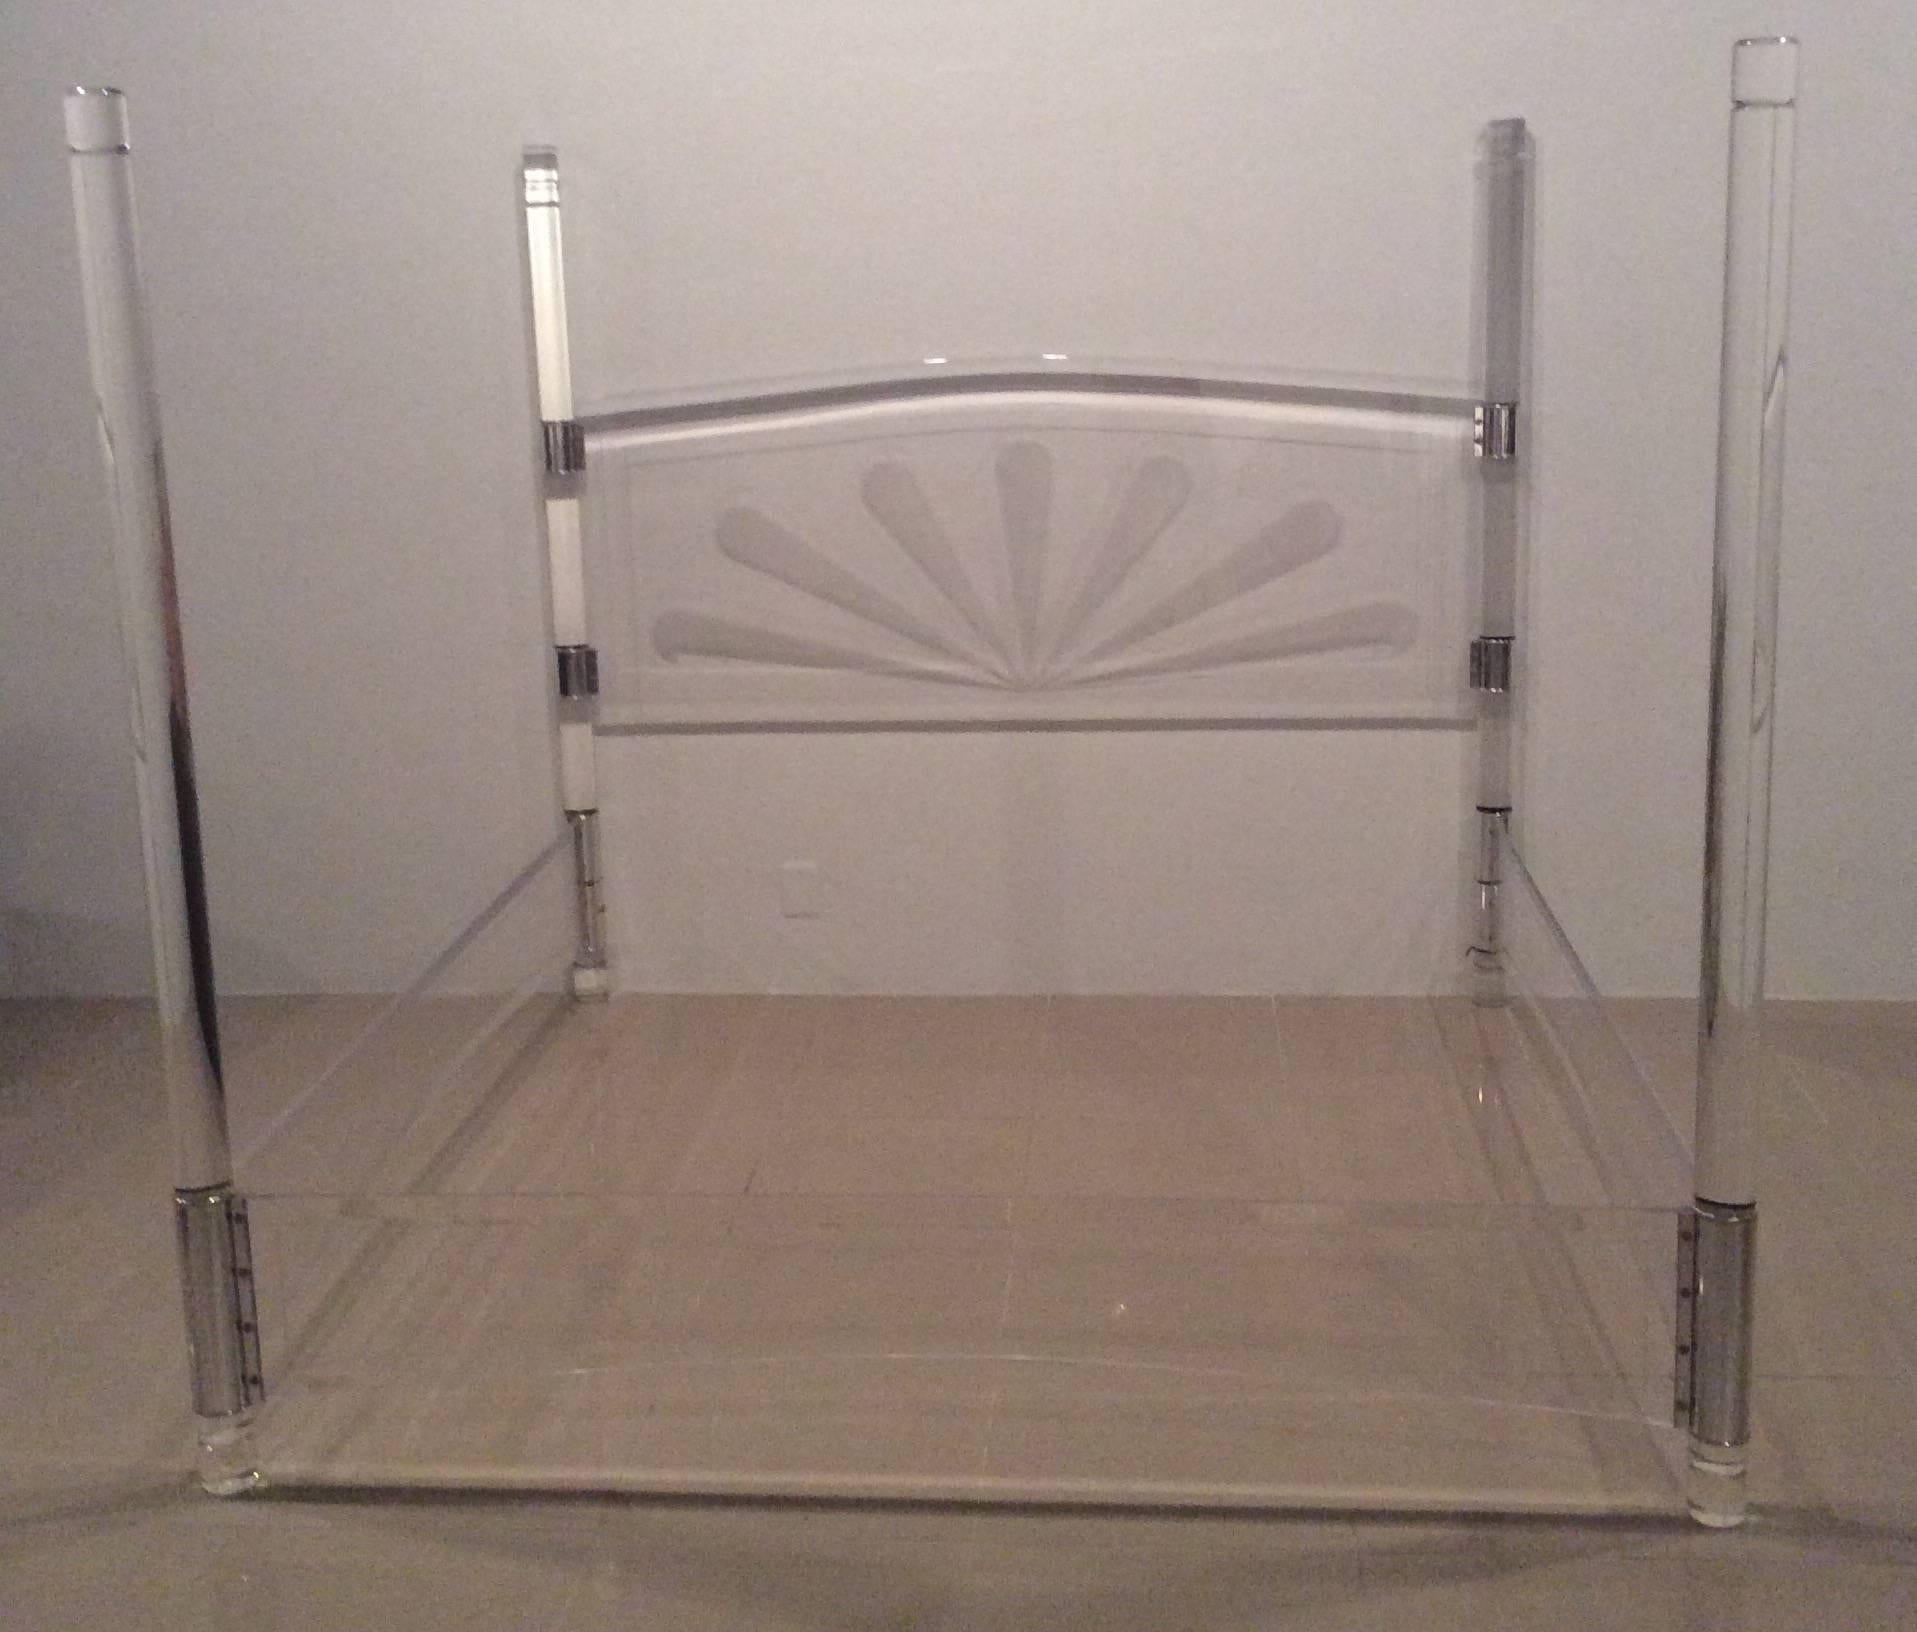 Incredible vintage Mid-Century Modern, Lucite and chrome bed in the style of Charles Hollis Jones, four post canopy style, king size, includes headboard, side rails, footboard, posts. The Lucite is incredibly thick! This is in excellent shape and